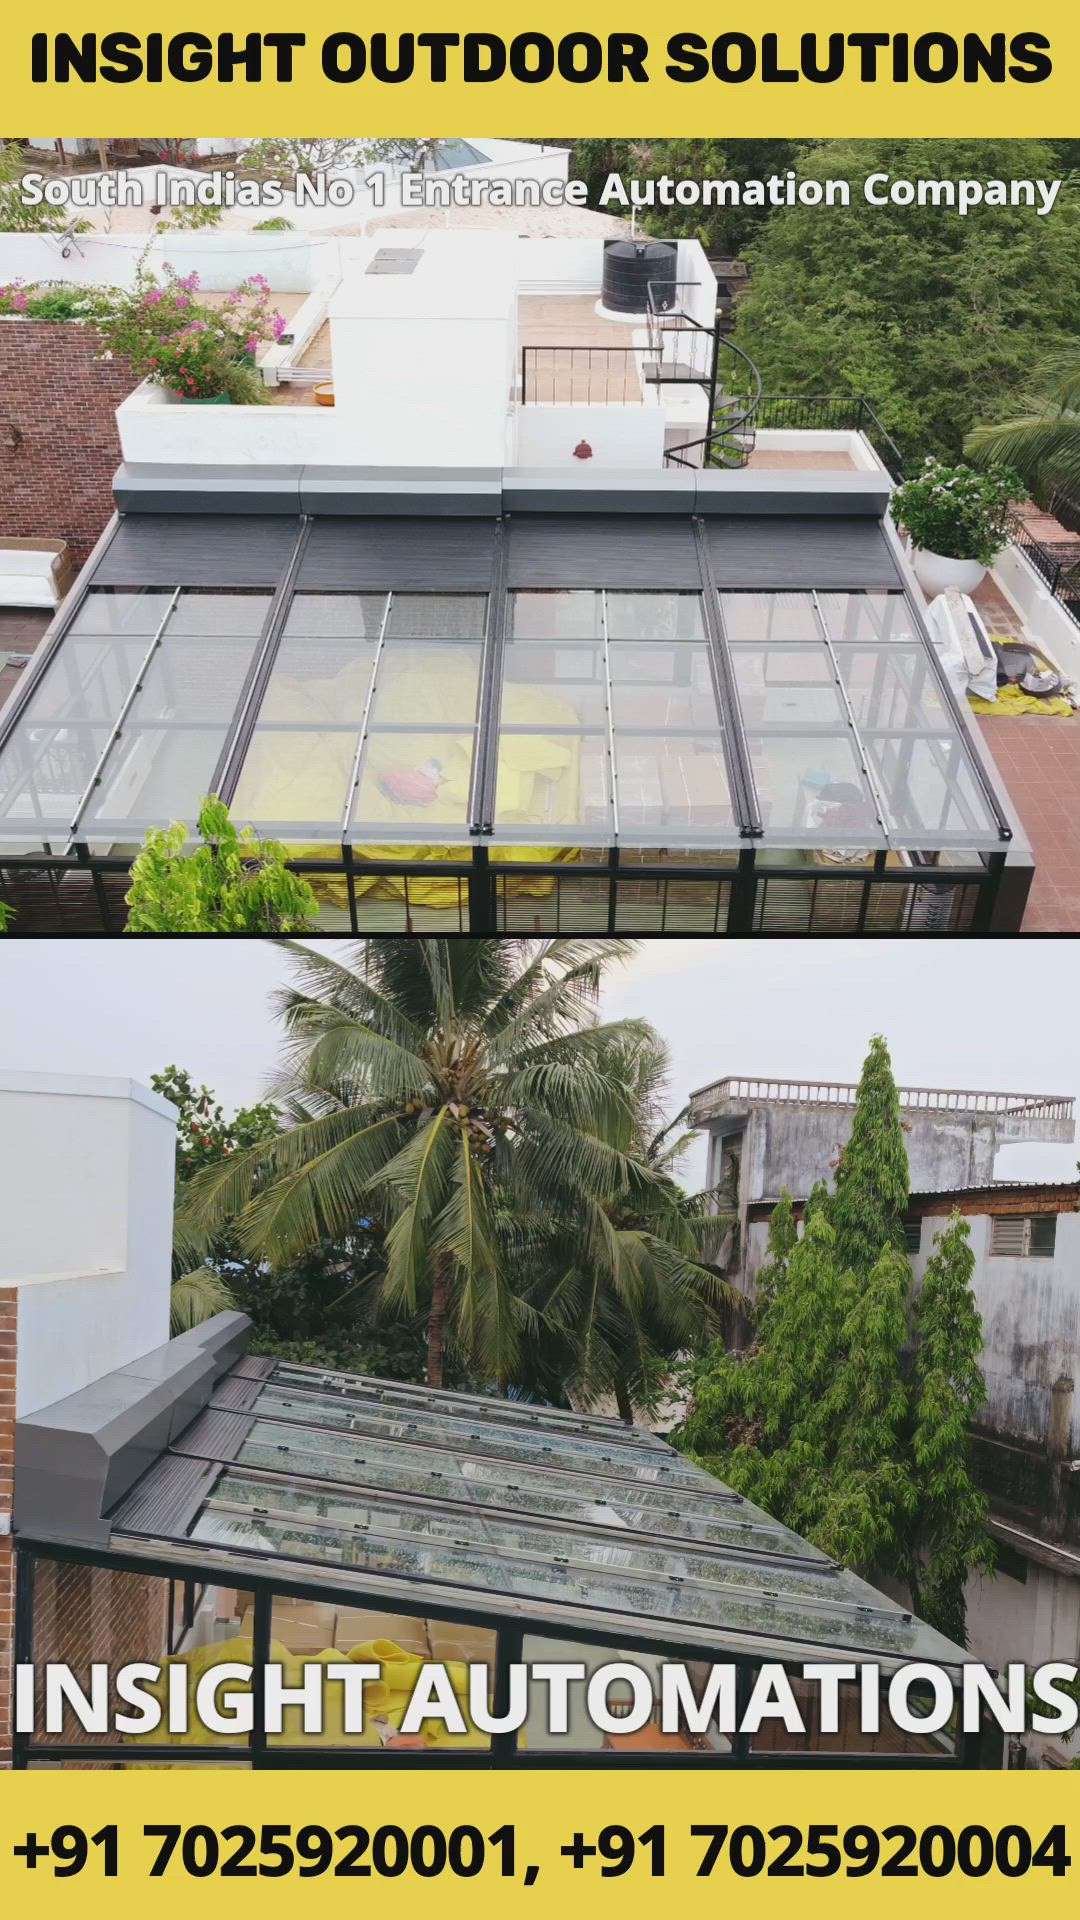 Roof Top Rolling Shutters For Glass roofs, pergola, courtyard openings, etc
control sun light and at your finger tips
contact us for more details
+91 7025920001
+91 7025920004